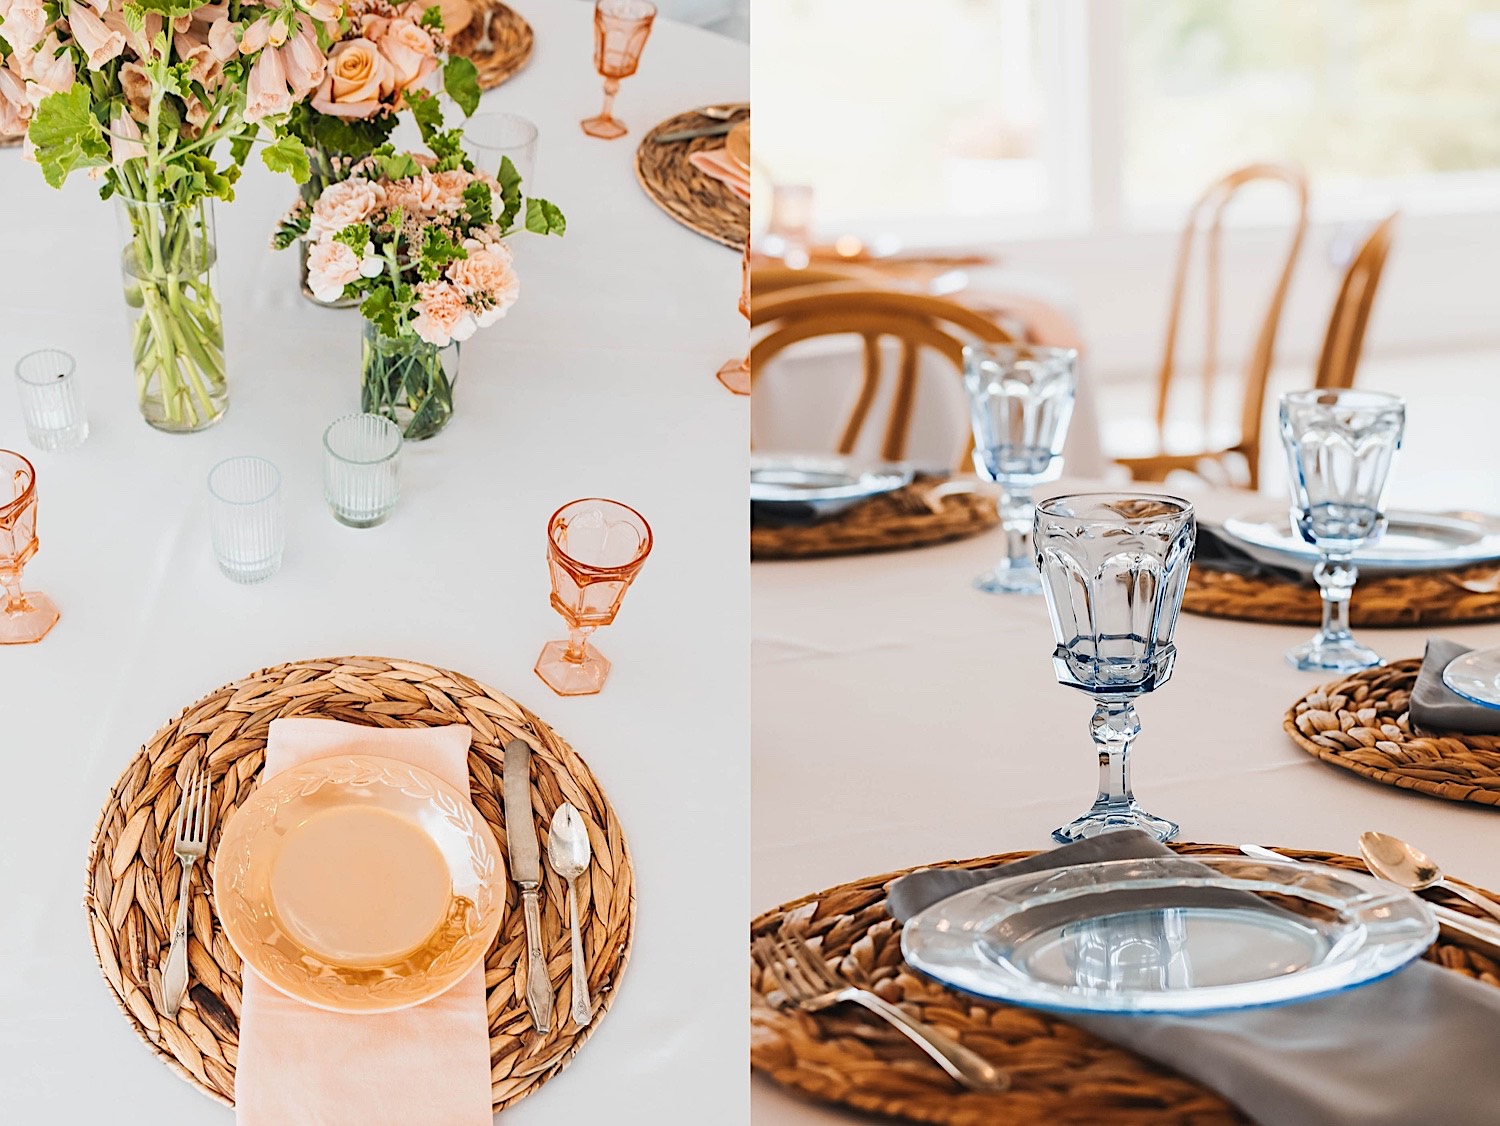 2 photos side by side of tableware set up on a table for a wedding, the left photo is pink tableware and the right photo is of light blue tableware